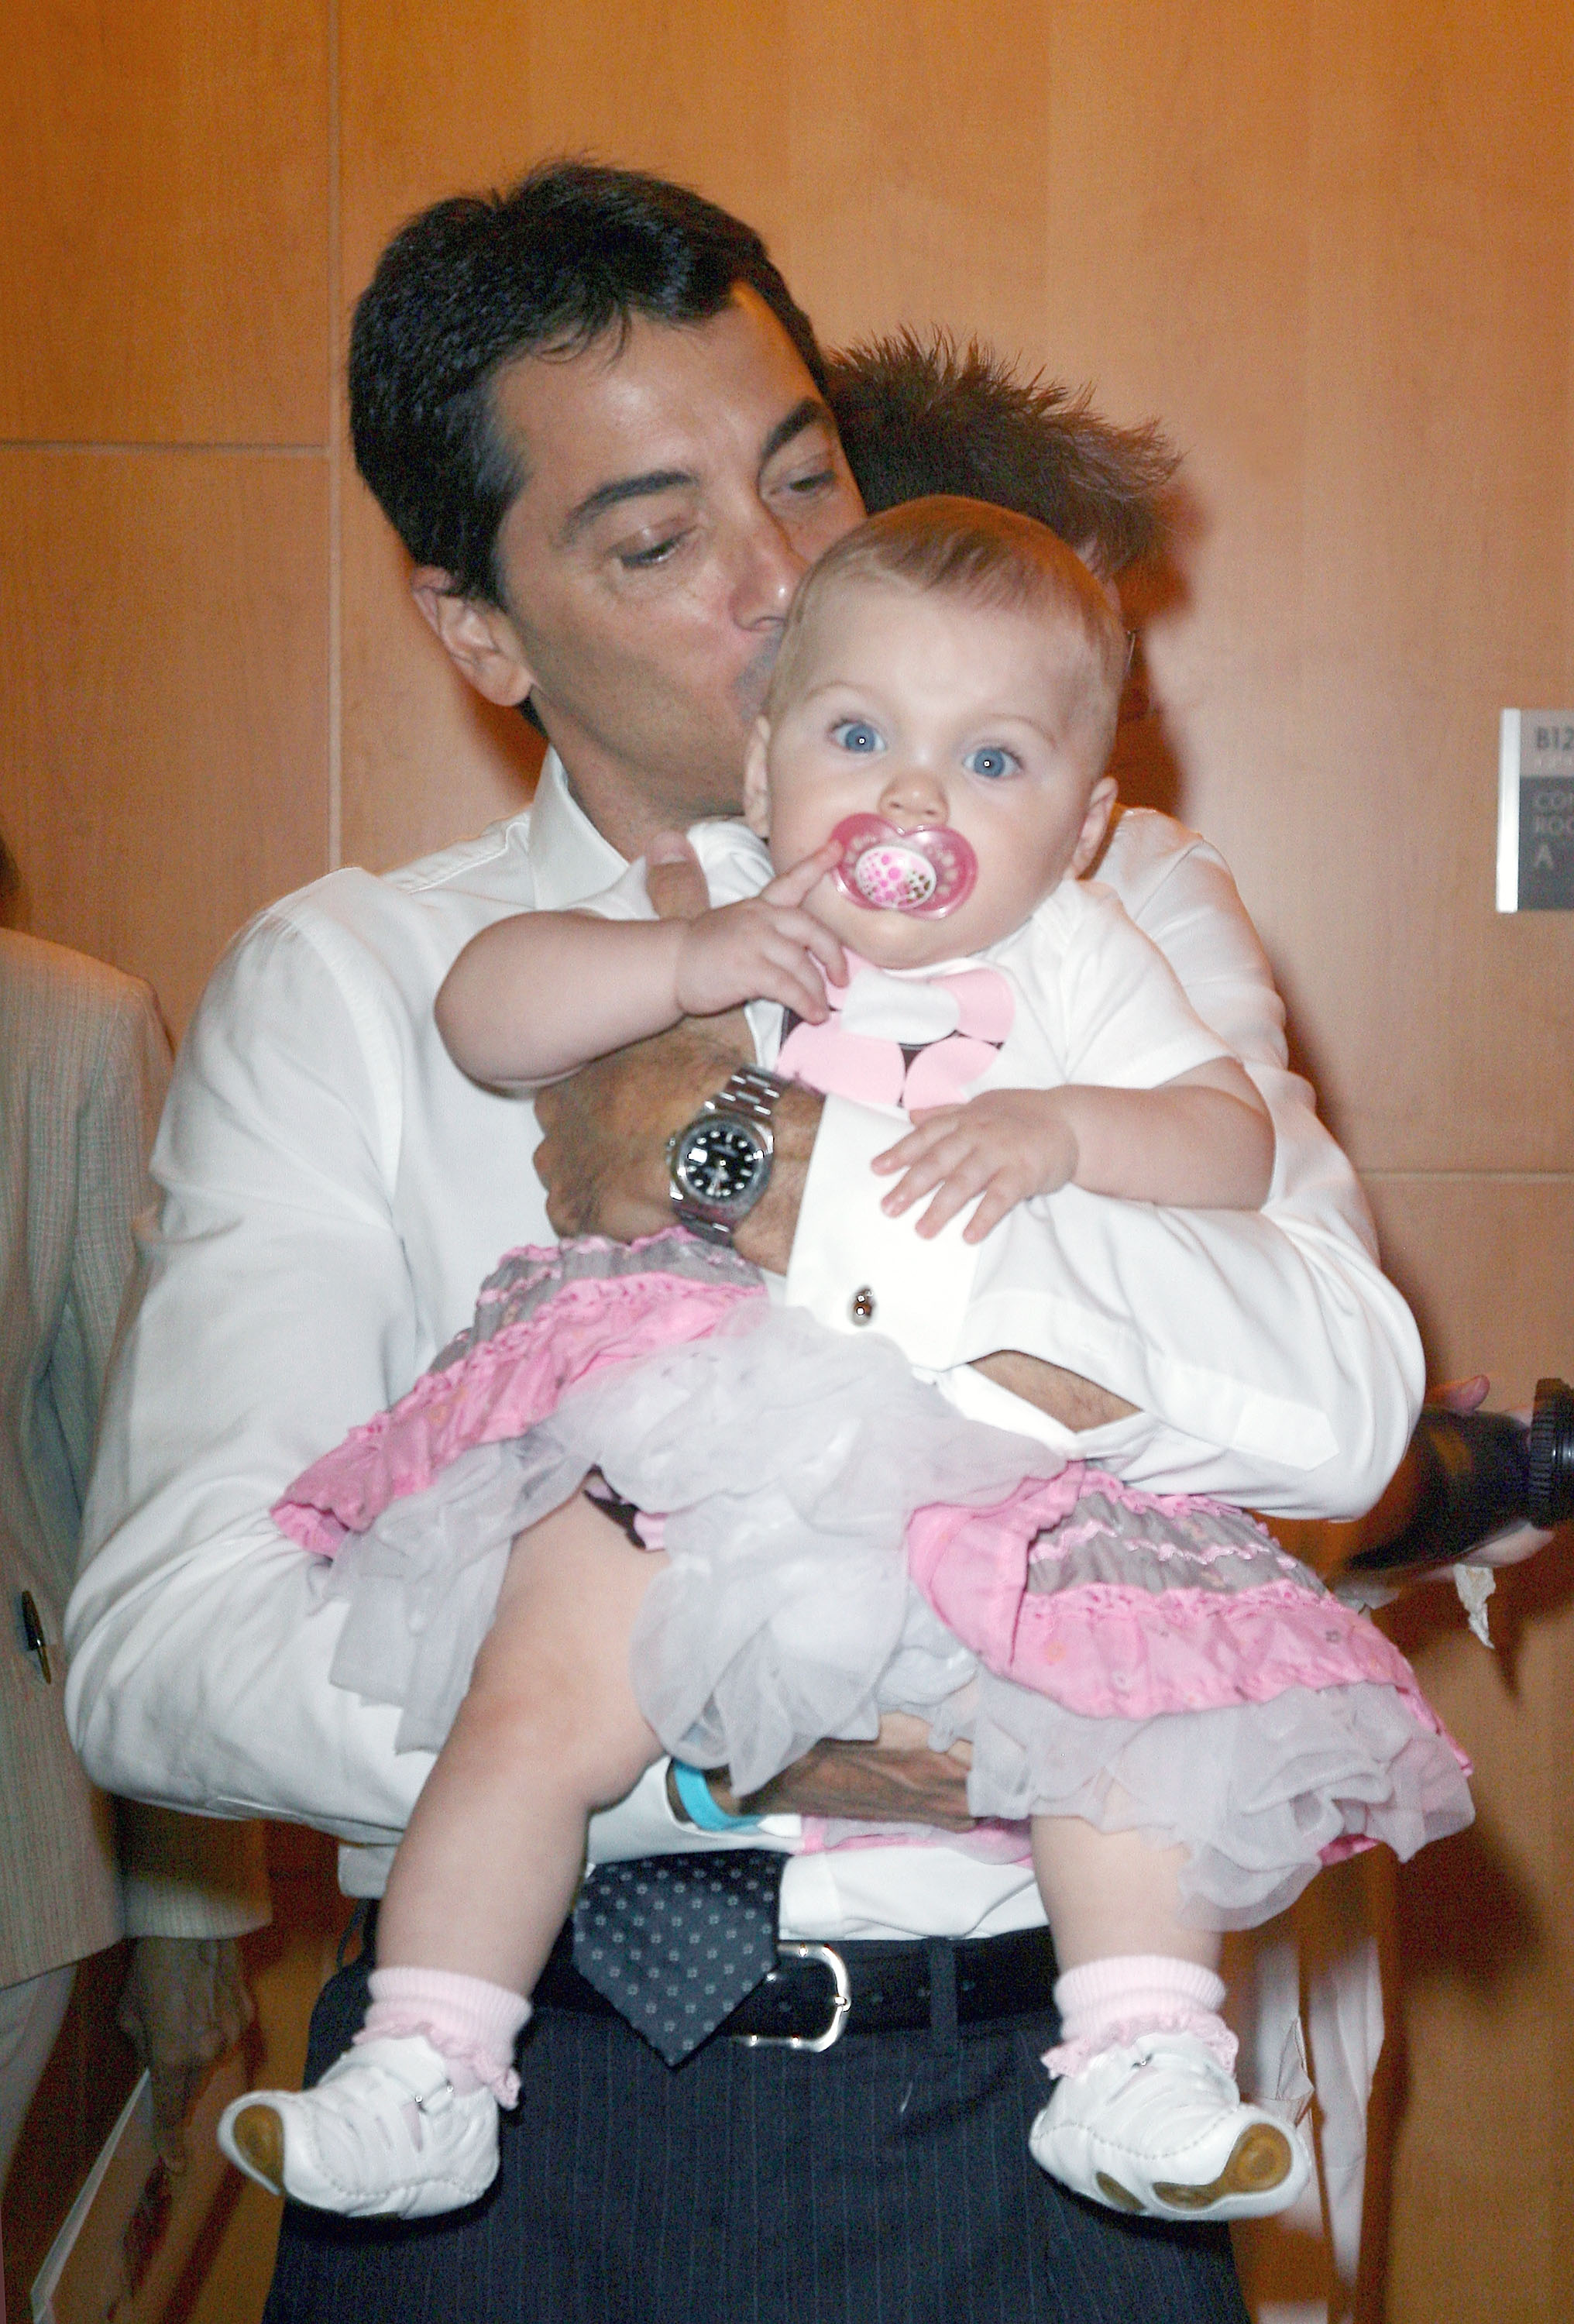 Actor Scott Baio and daughter Bailey attend a press conference to promote Save Babies Through Screening Foundation at UCLA on September 5, 2008 in Westwood, California. | Source: Getty Images